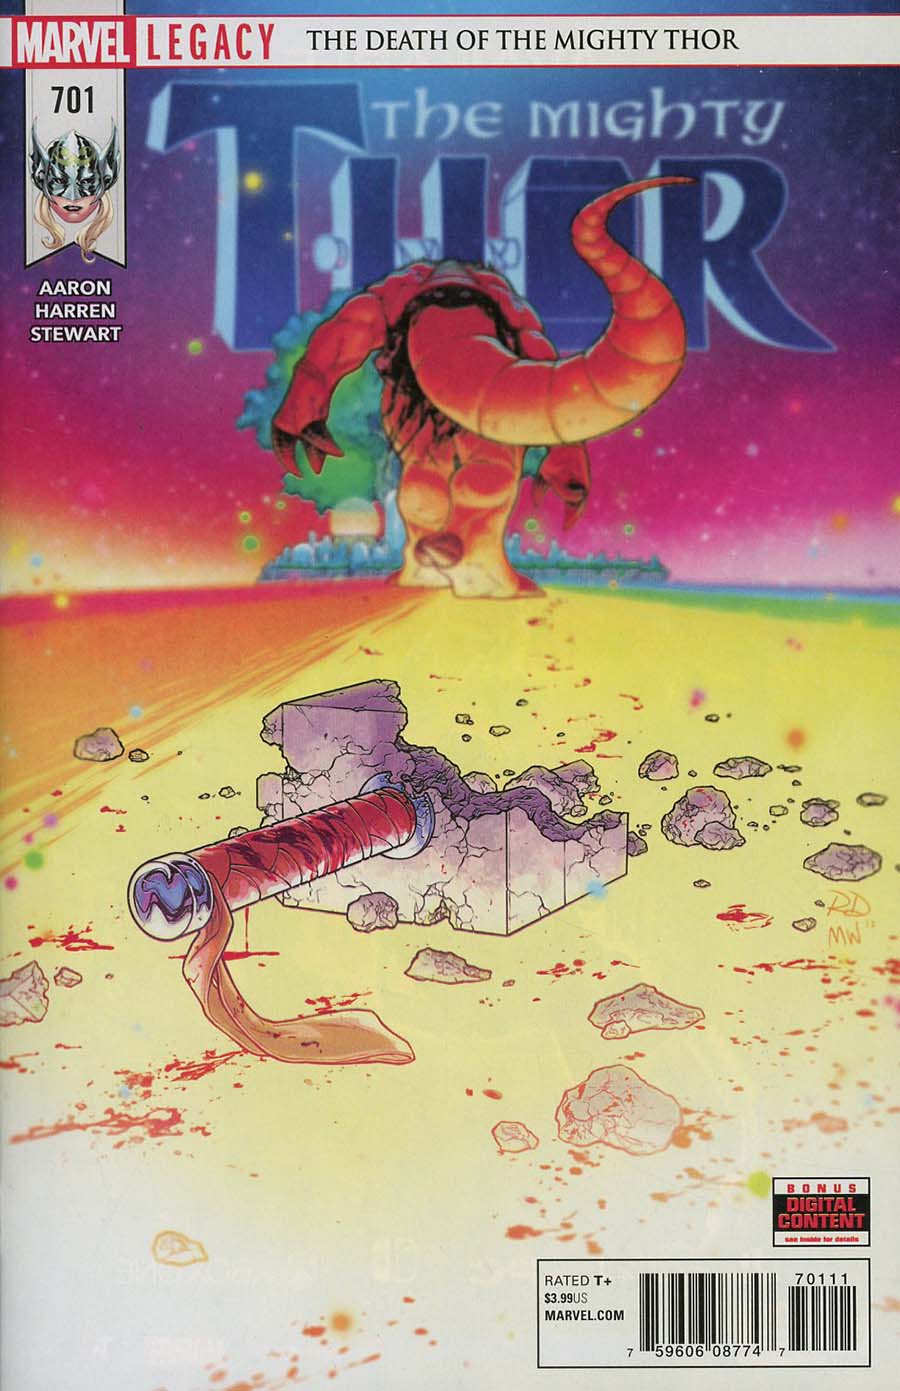 Mighty Thor Vol 2 #701 Cover A 1st Ptg Regular Russell Dauterman Cover (Marvel Legacy Tie-In)